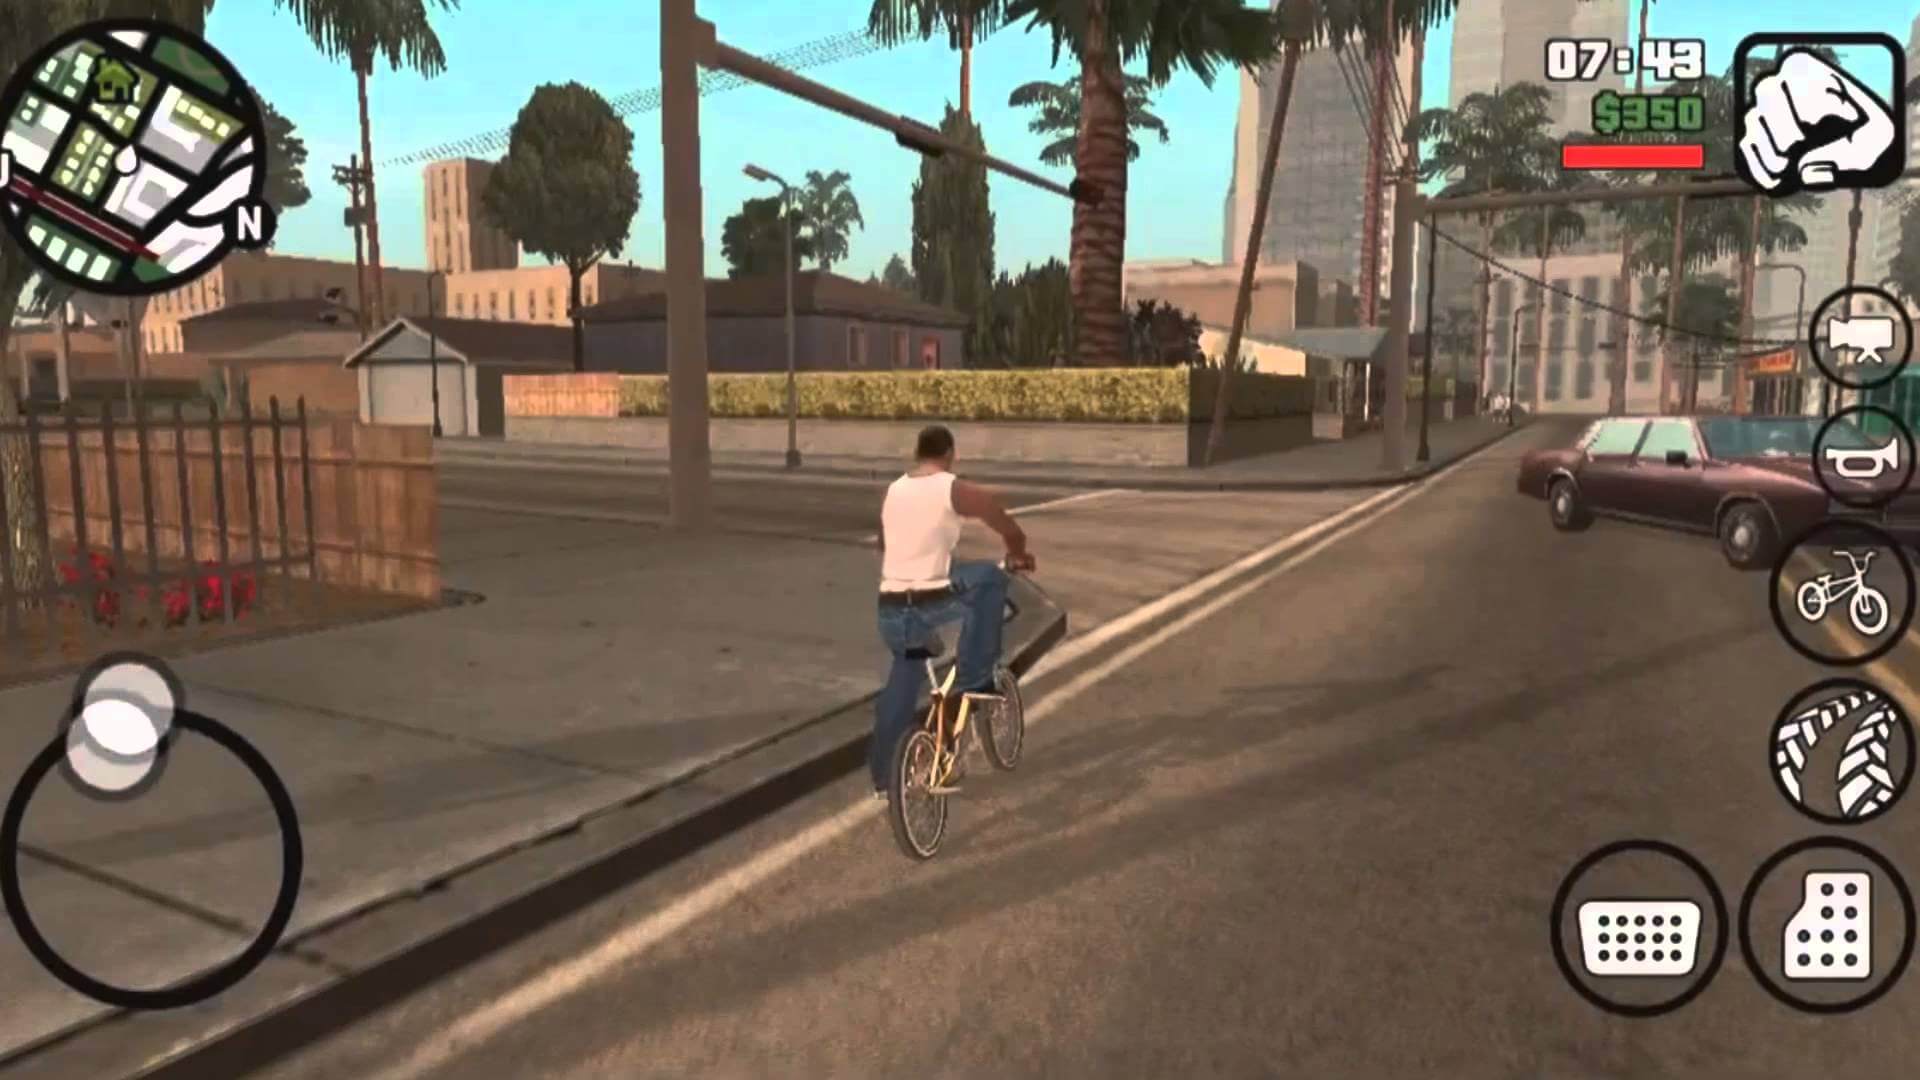 Gta San Andreas Free Download Full Game For Android